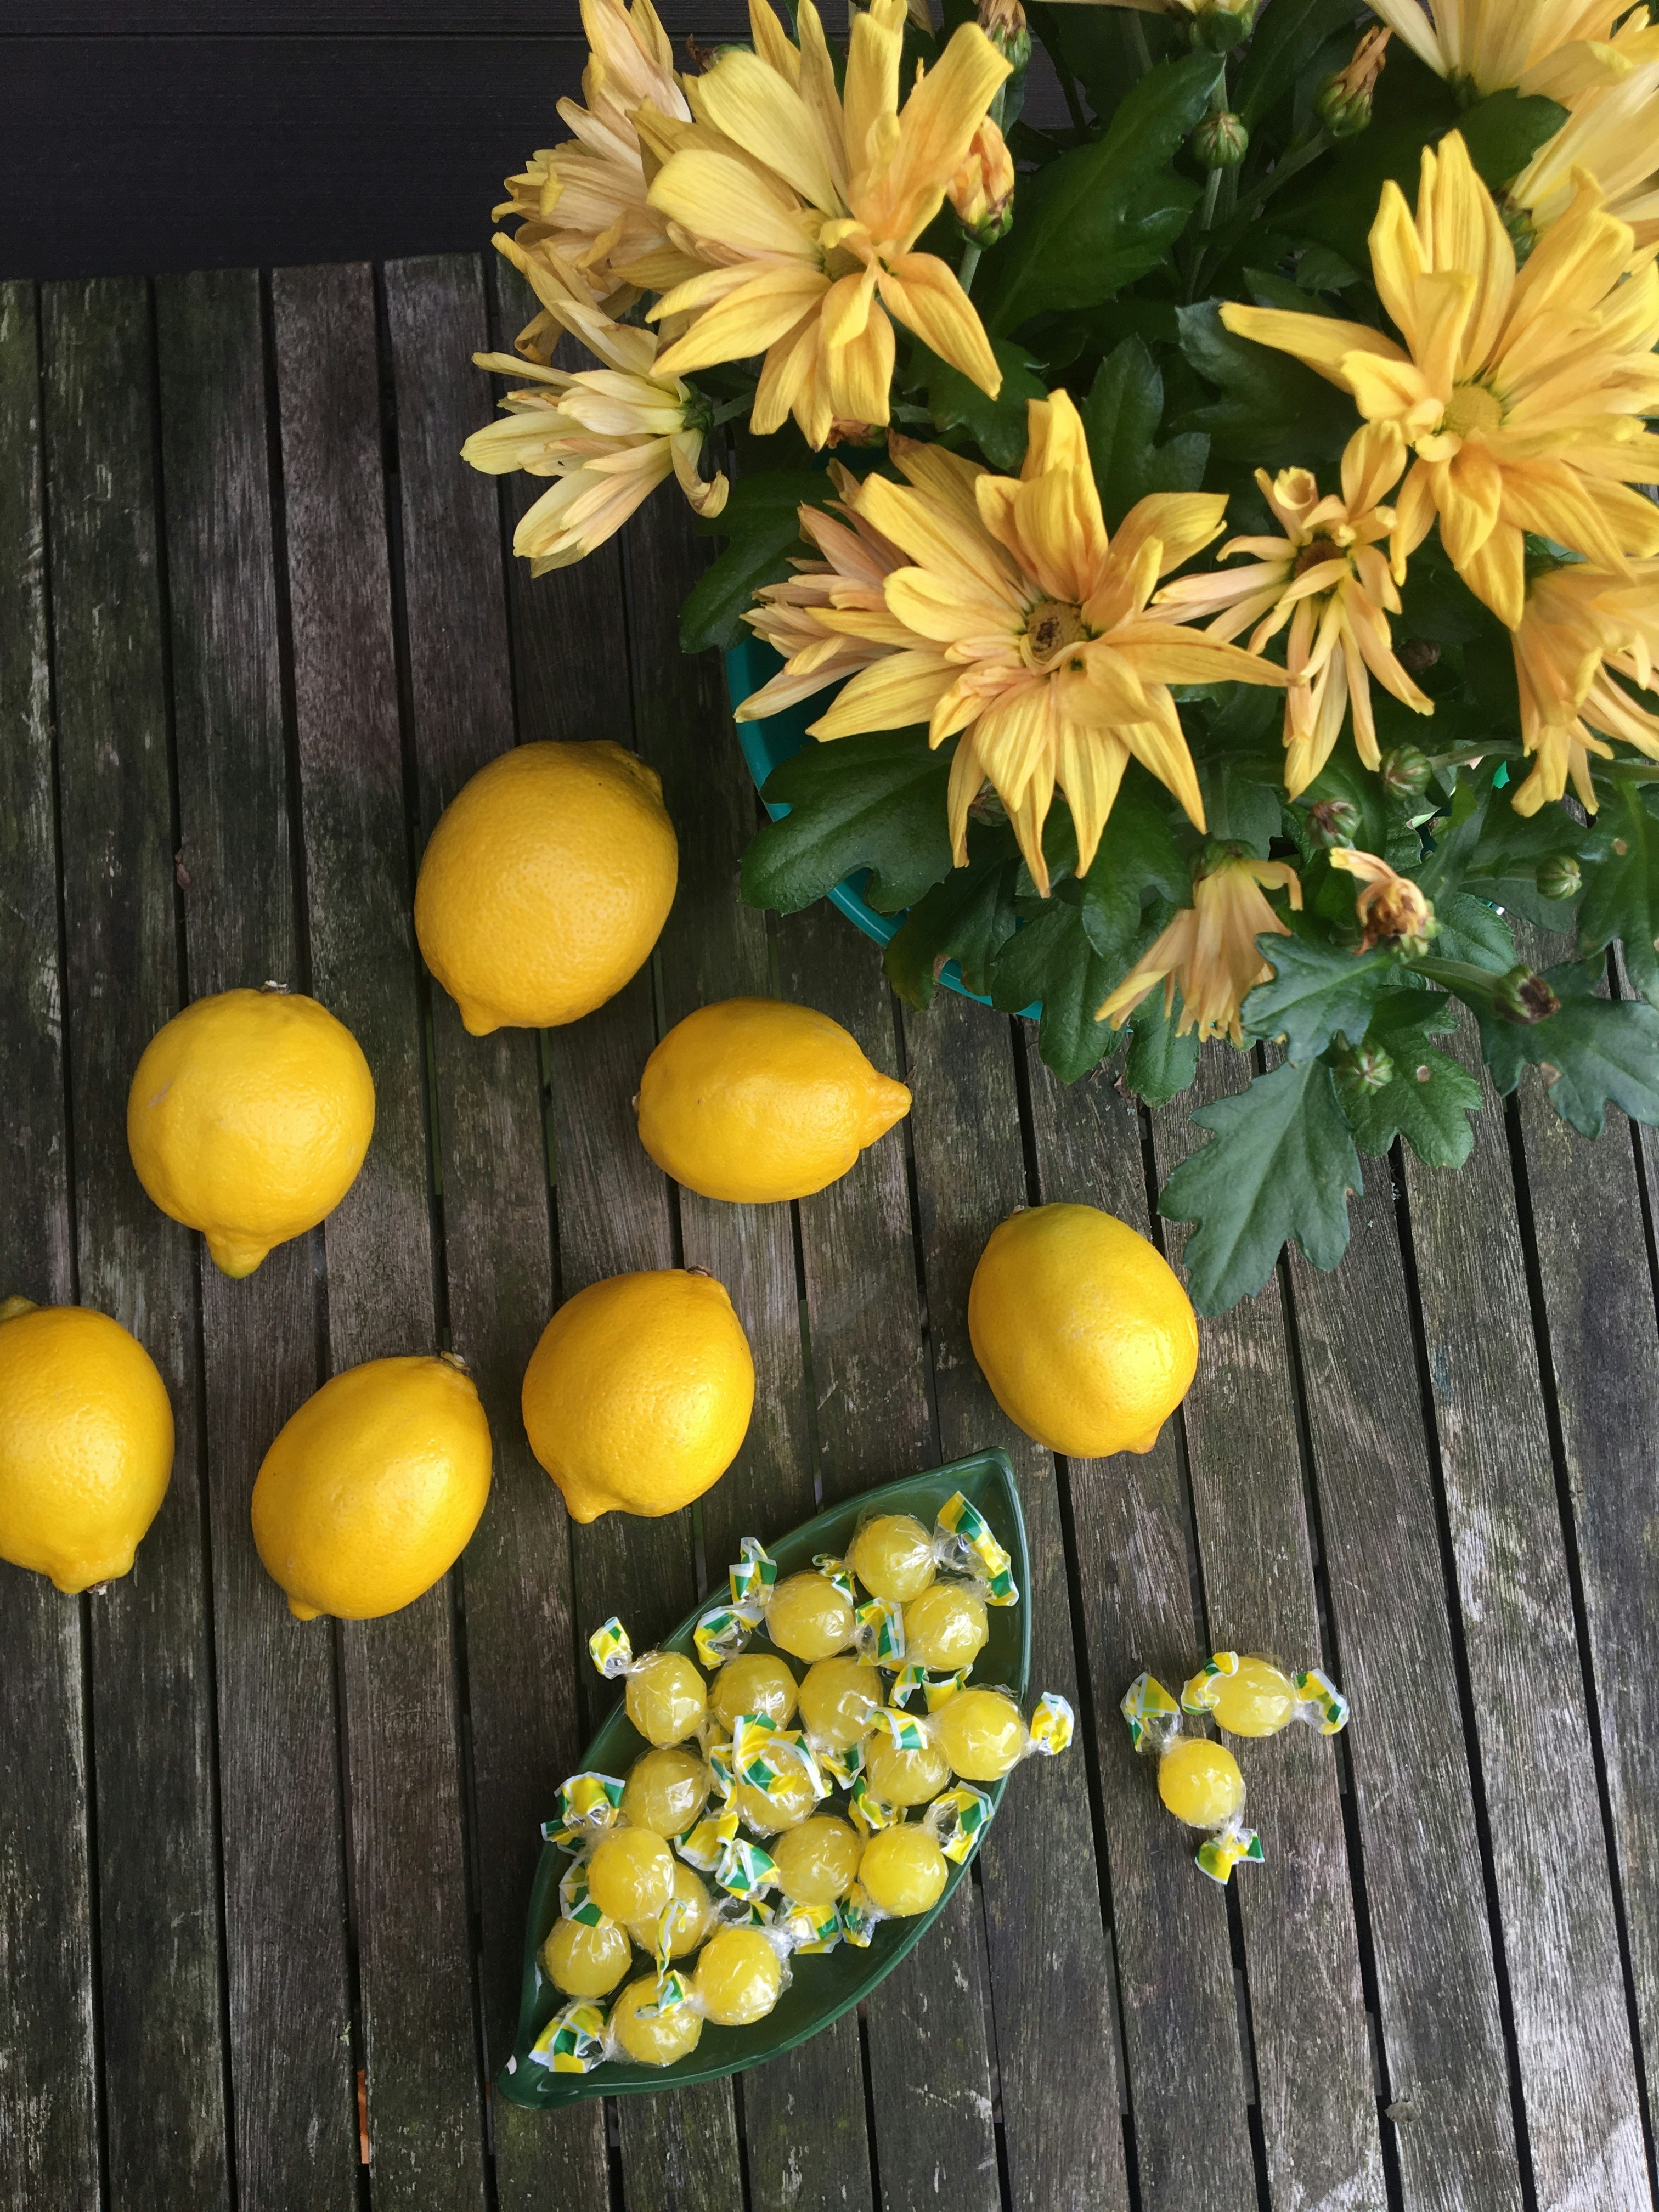 photo of lemons and yellow flowers